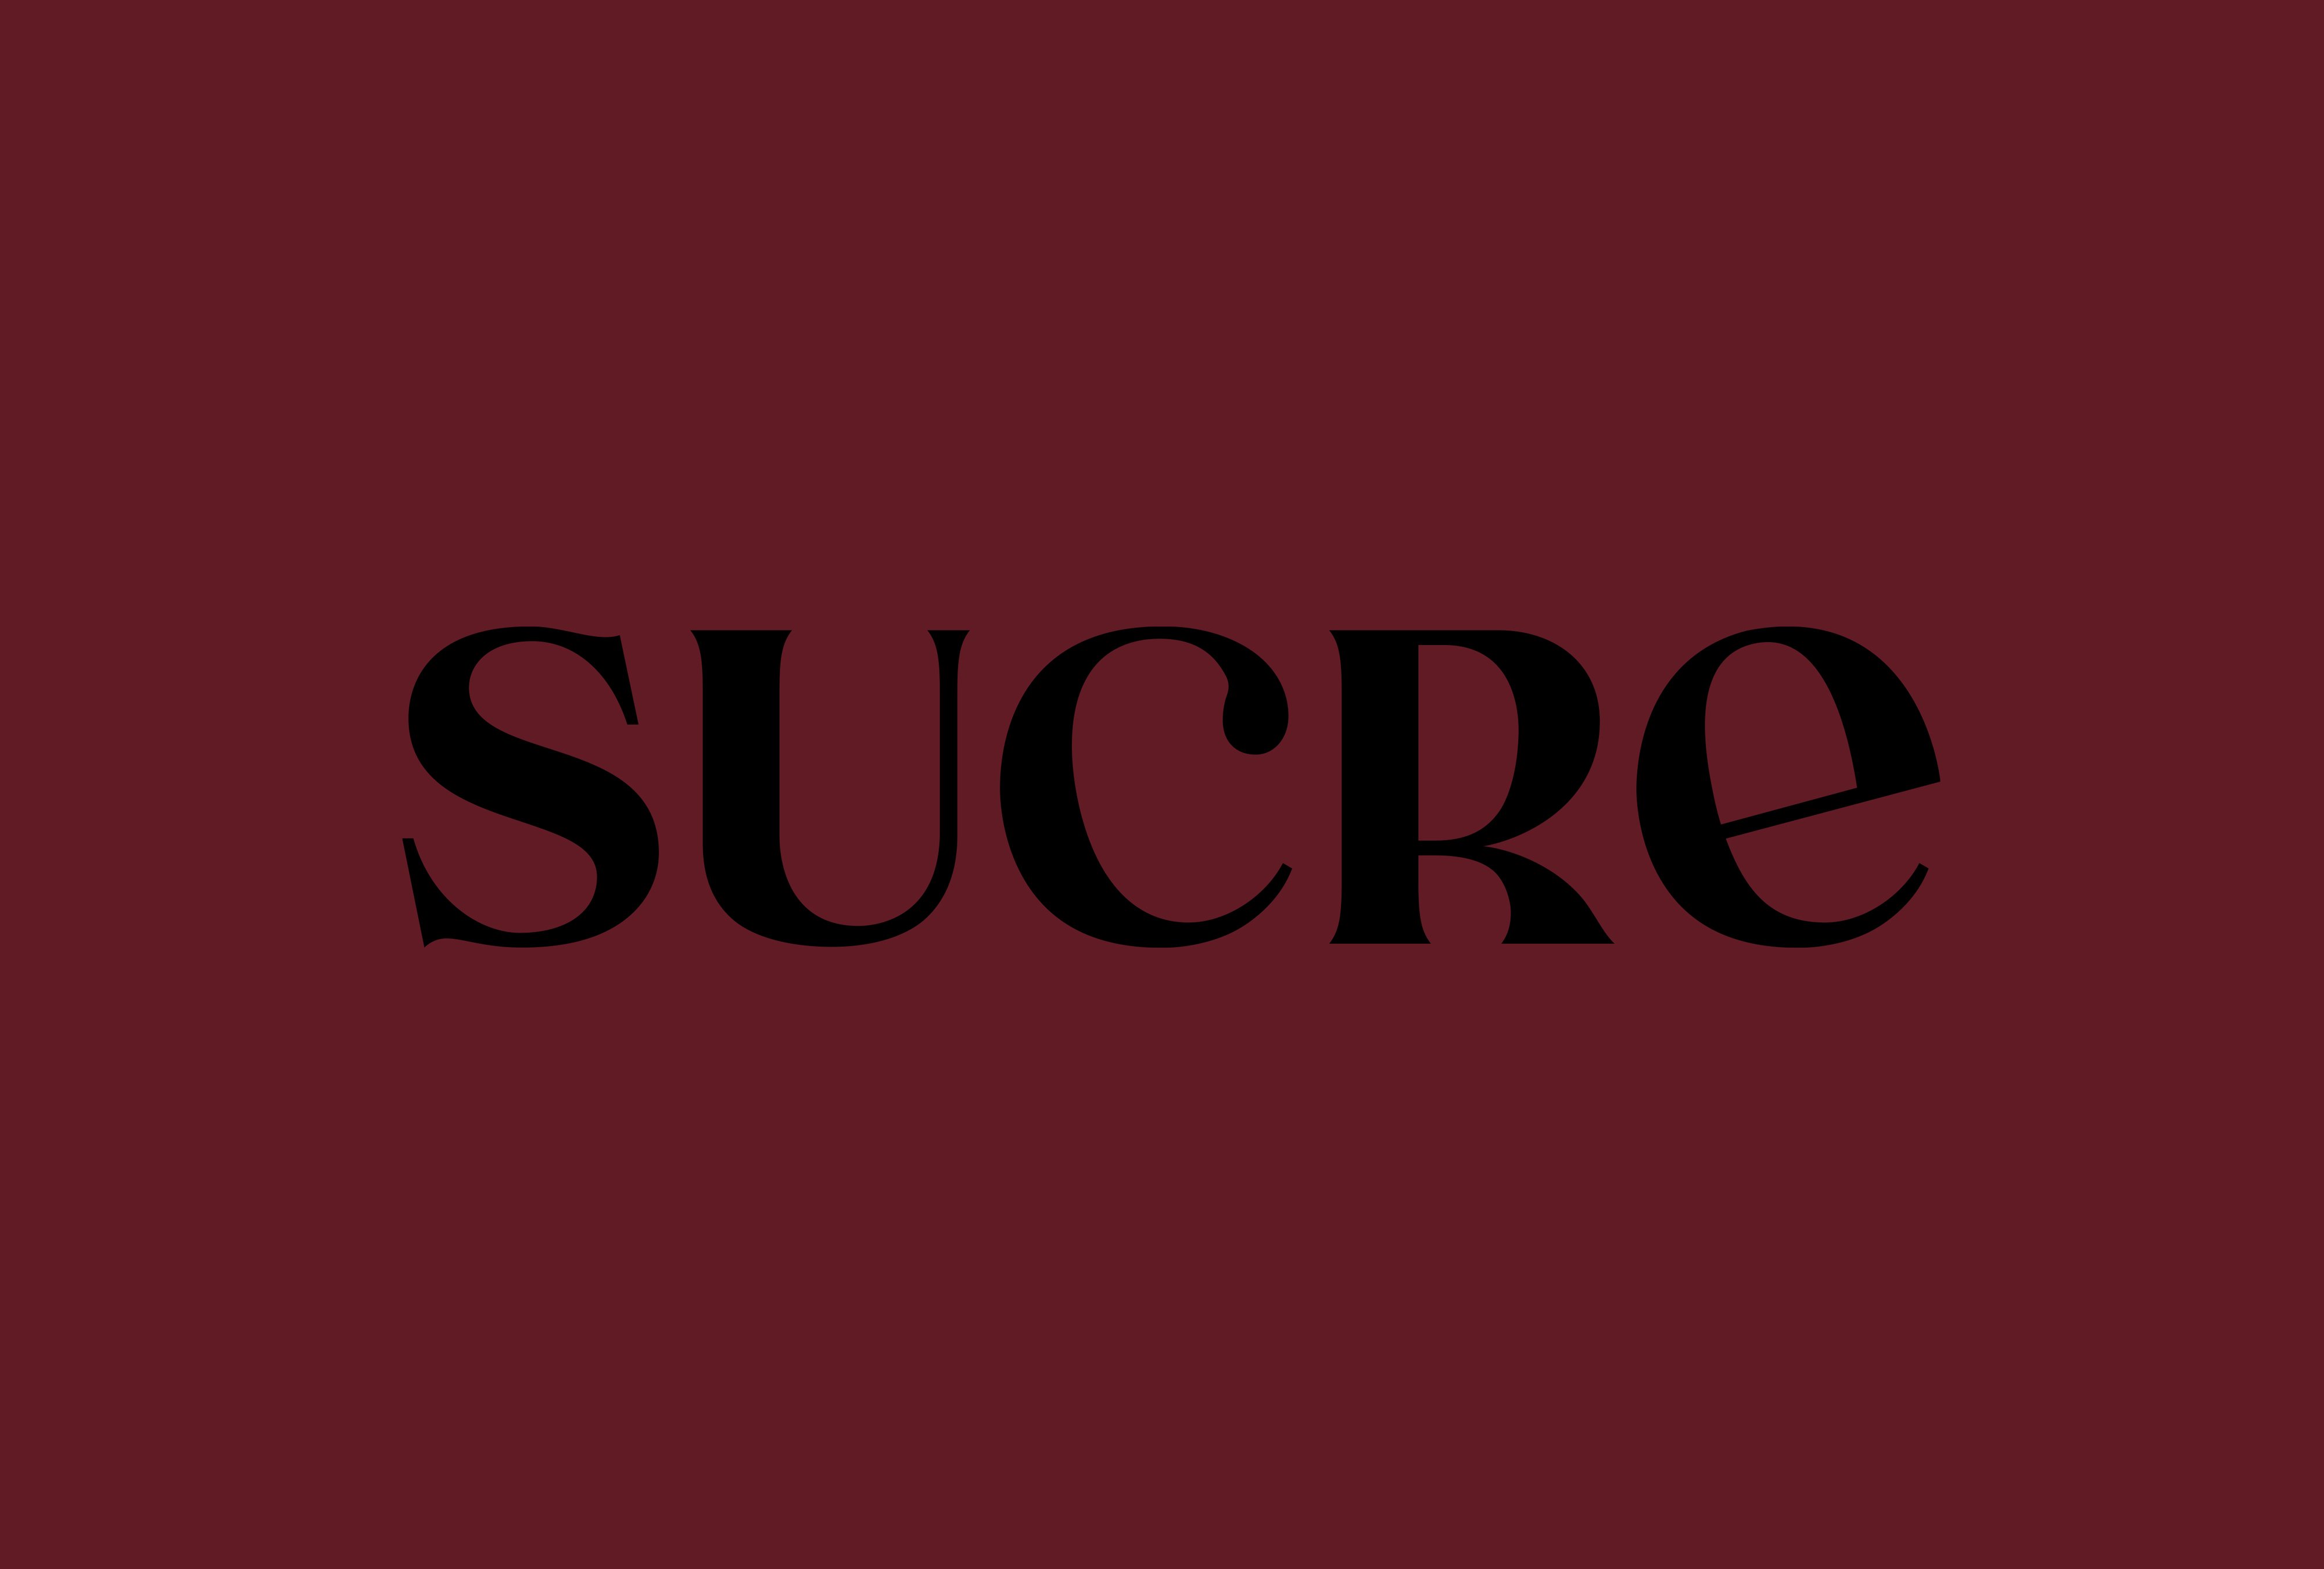 Logotype designed by Dutchscot for London-based Argentinian restaurant Sucre